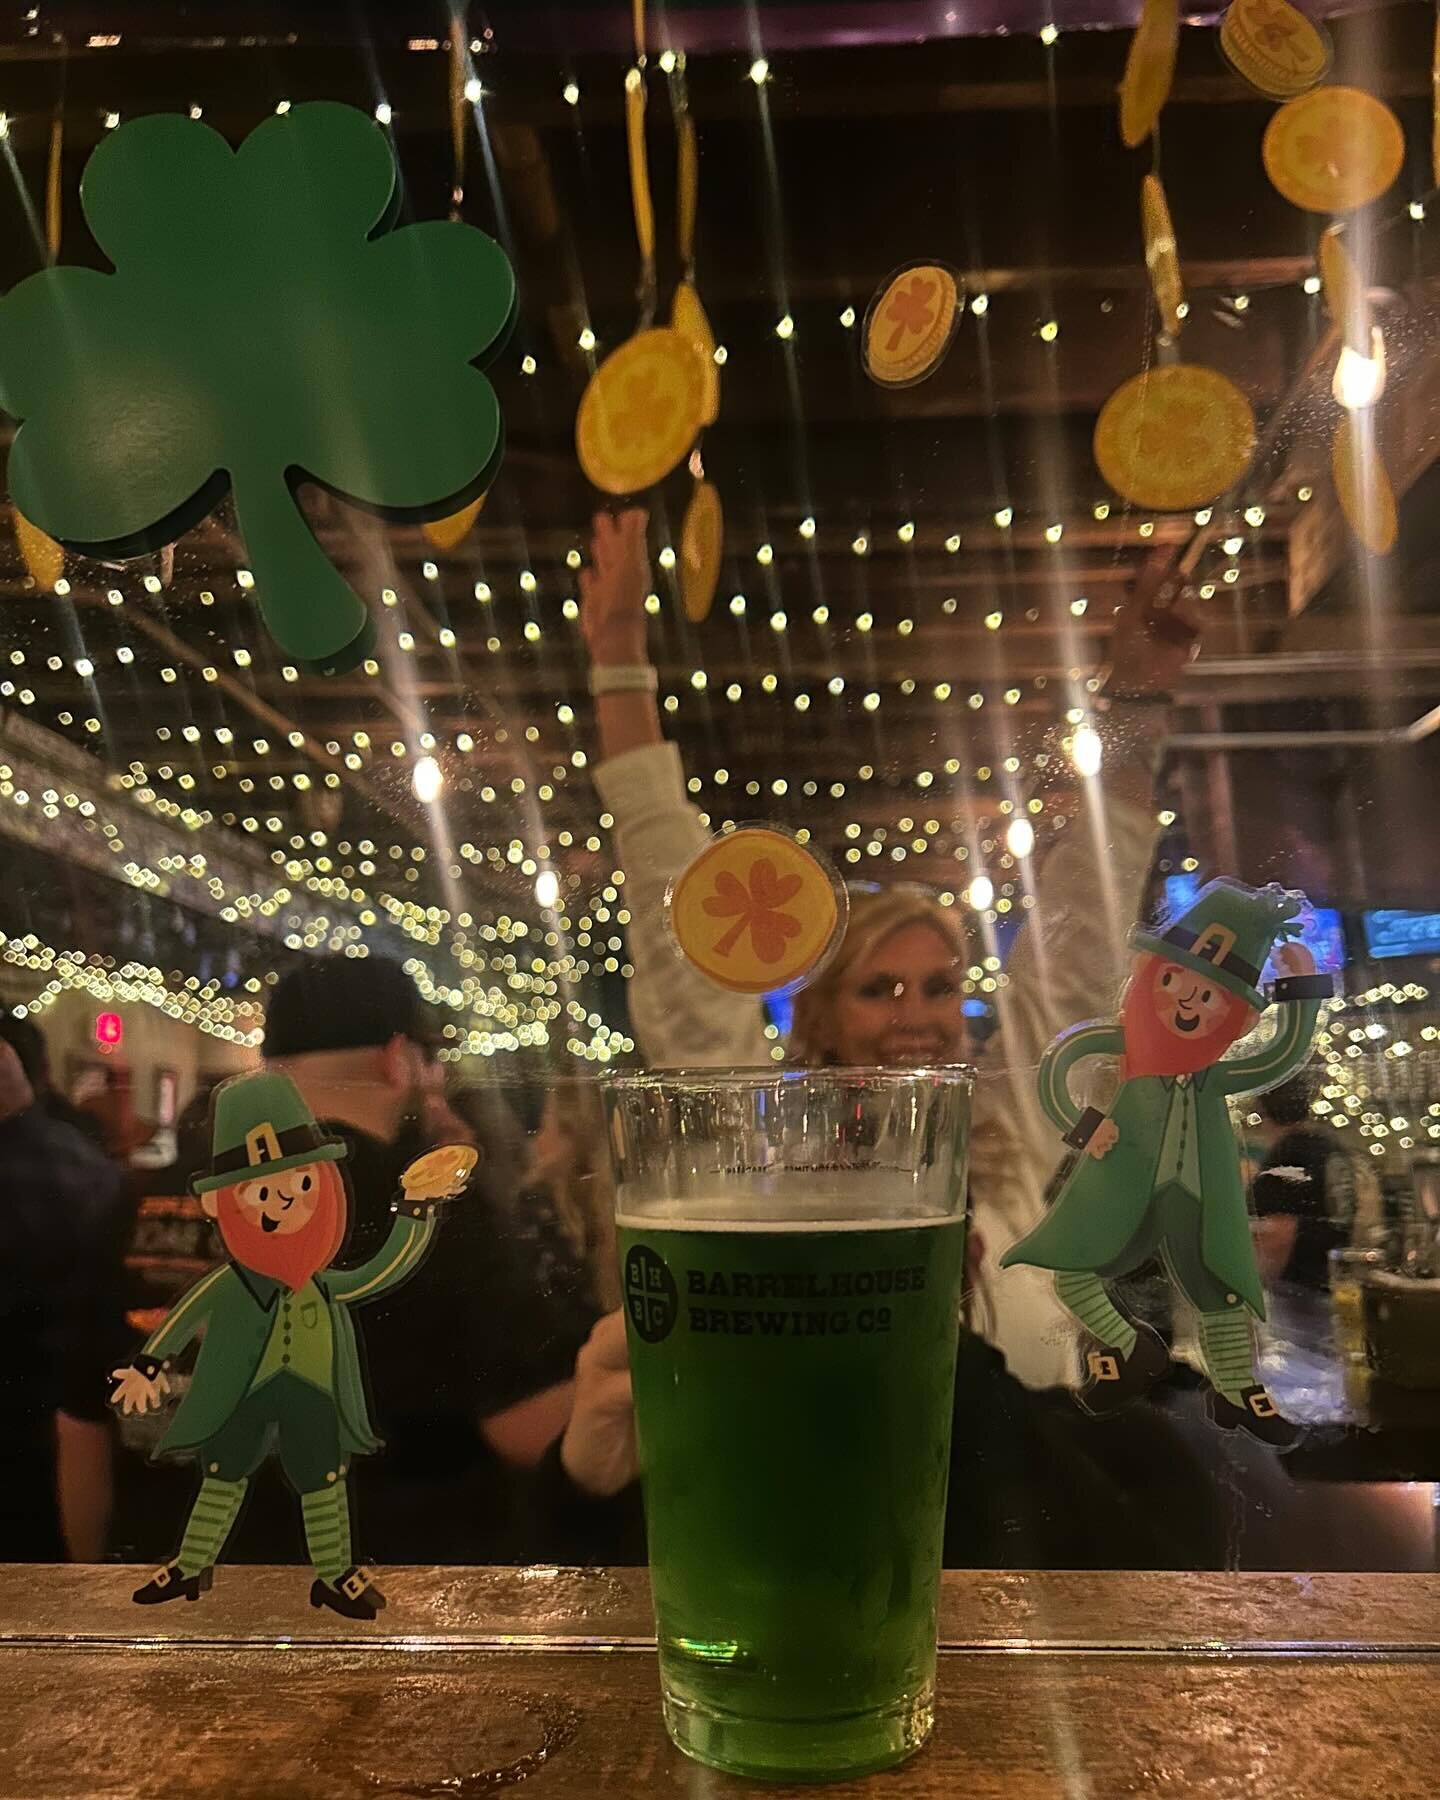 Did someone say 6AM?! 
Shamrock Daze ~ Crafted with Leprechaun Tears
Green Beer tastes the best when served at 6am on Saint Patricks Day!🍀☘️ 
Trust us, a Leprechaun told us! 🍻

Join us this Saint Patricks Day at 6AM for GREEN beer🍀